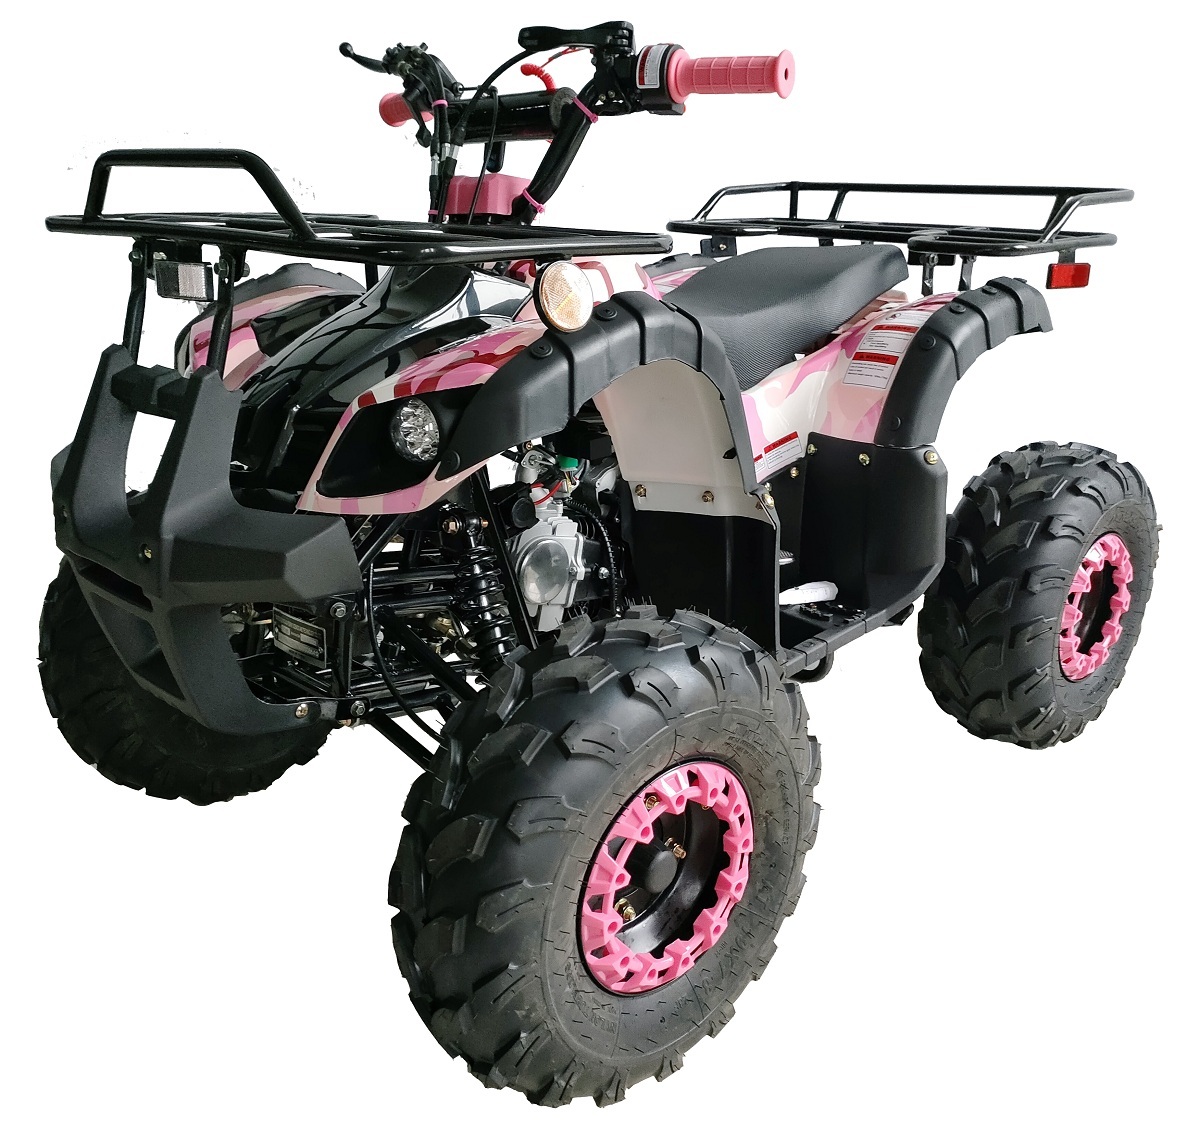 Vitacci RIDER-12 125cc ATV, Single Cylinder, 4 Stroke, Air-Cooled - Fully Assembled and Tested